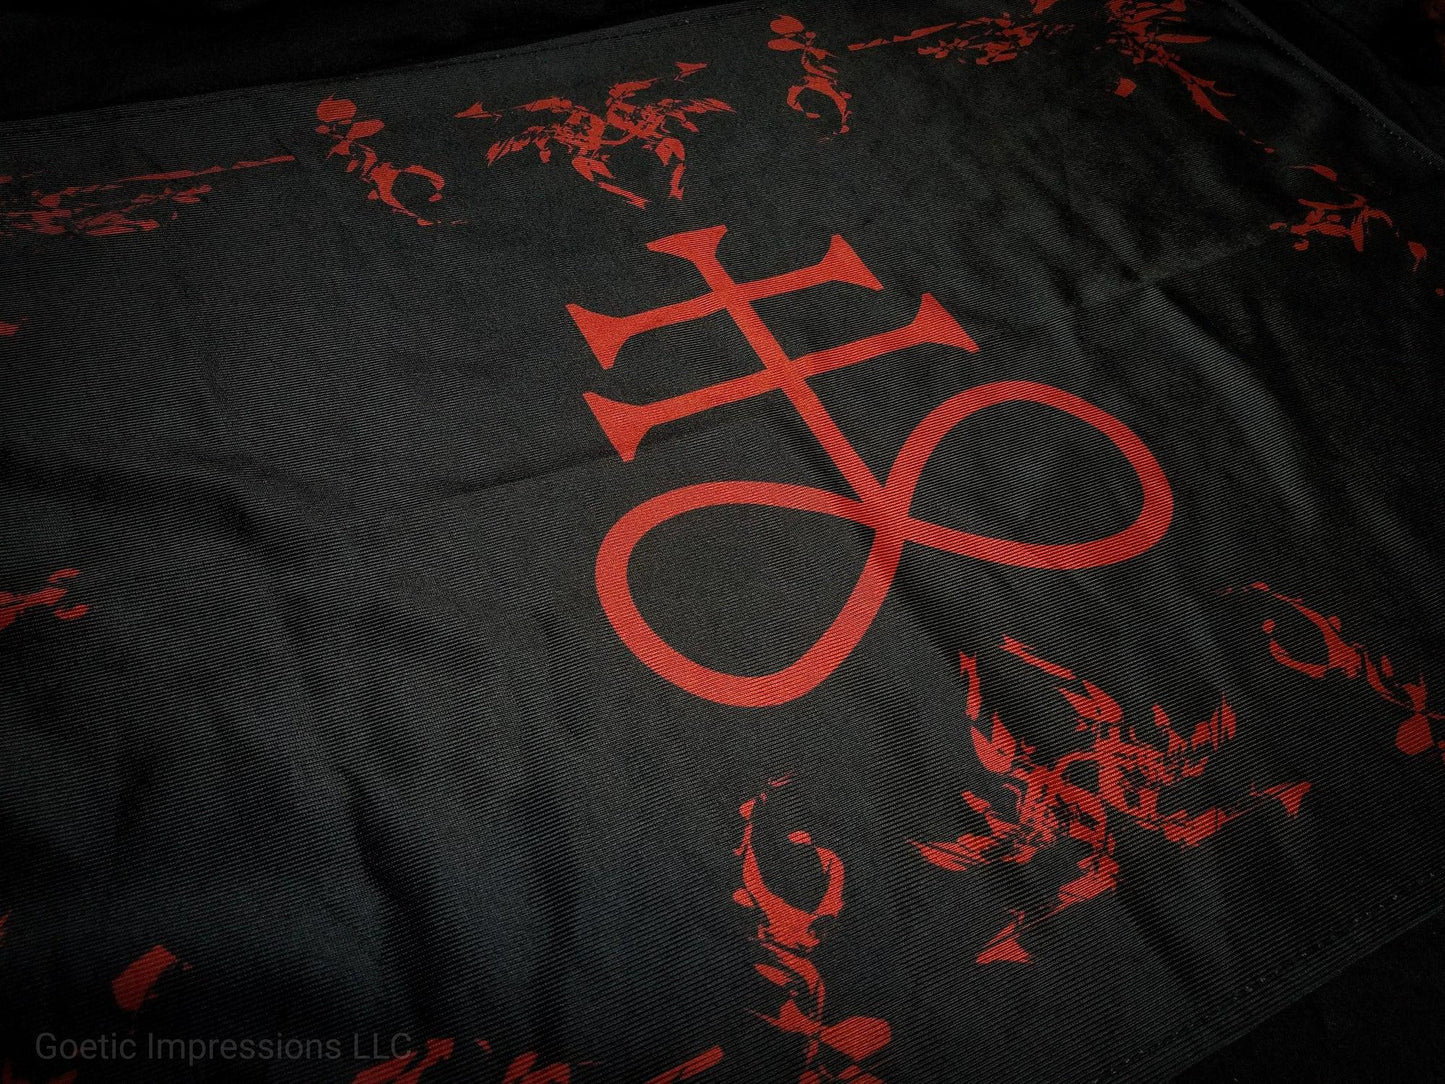 Black and red Leviathan altar cloth